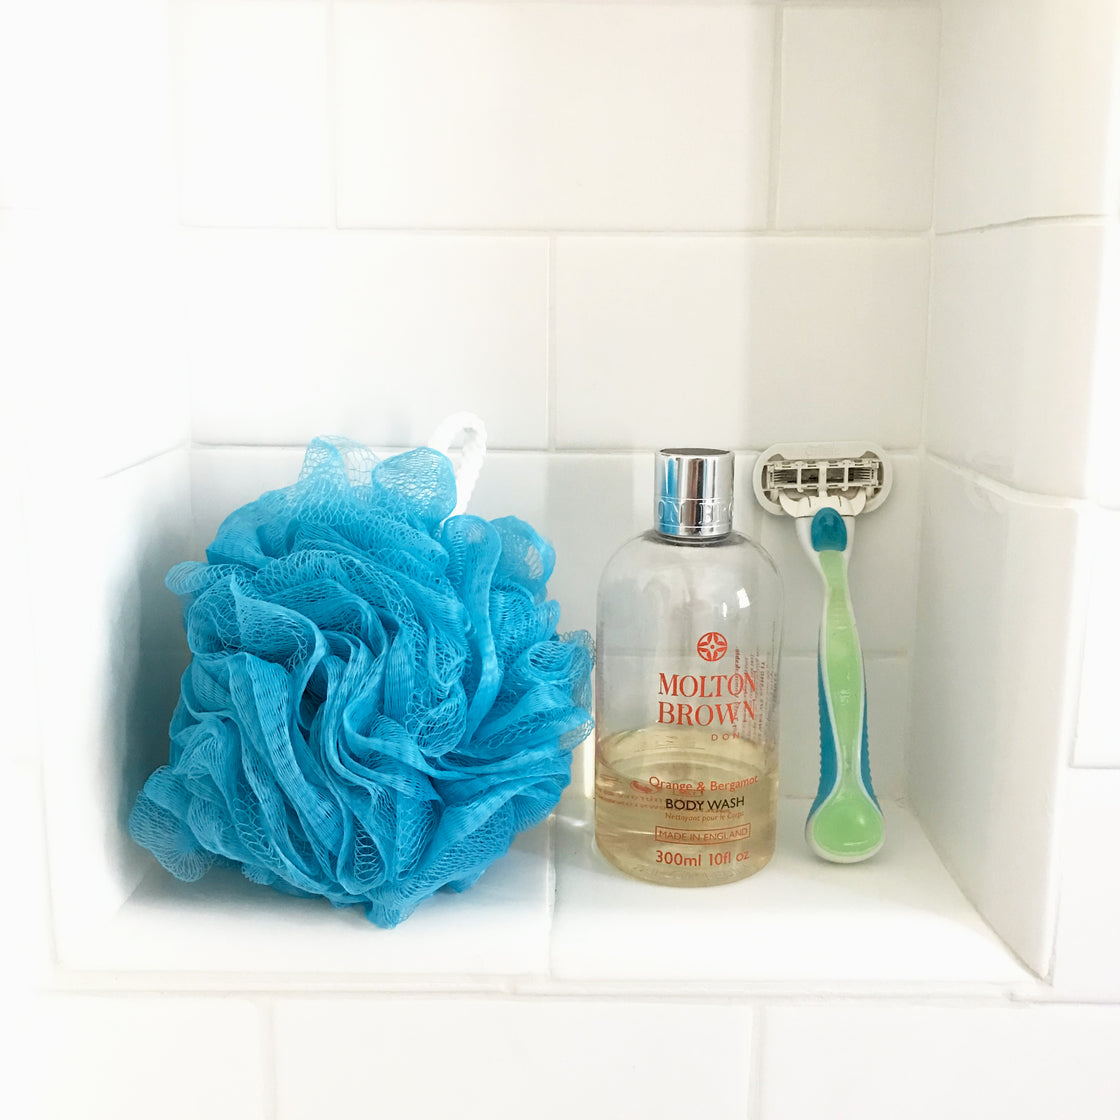 The rengora mesh scrubber placed alongside a bottle of body wash and a shaver within a bathroom setting